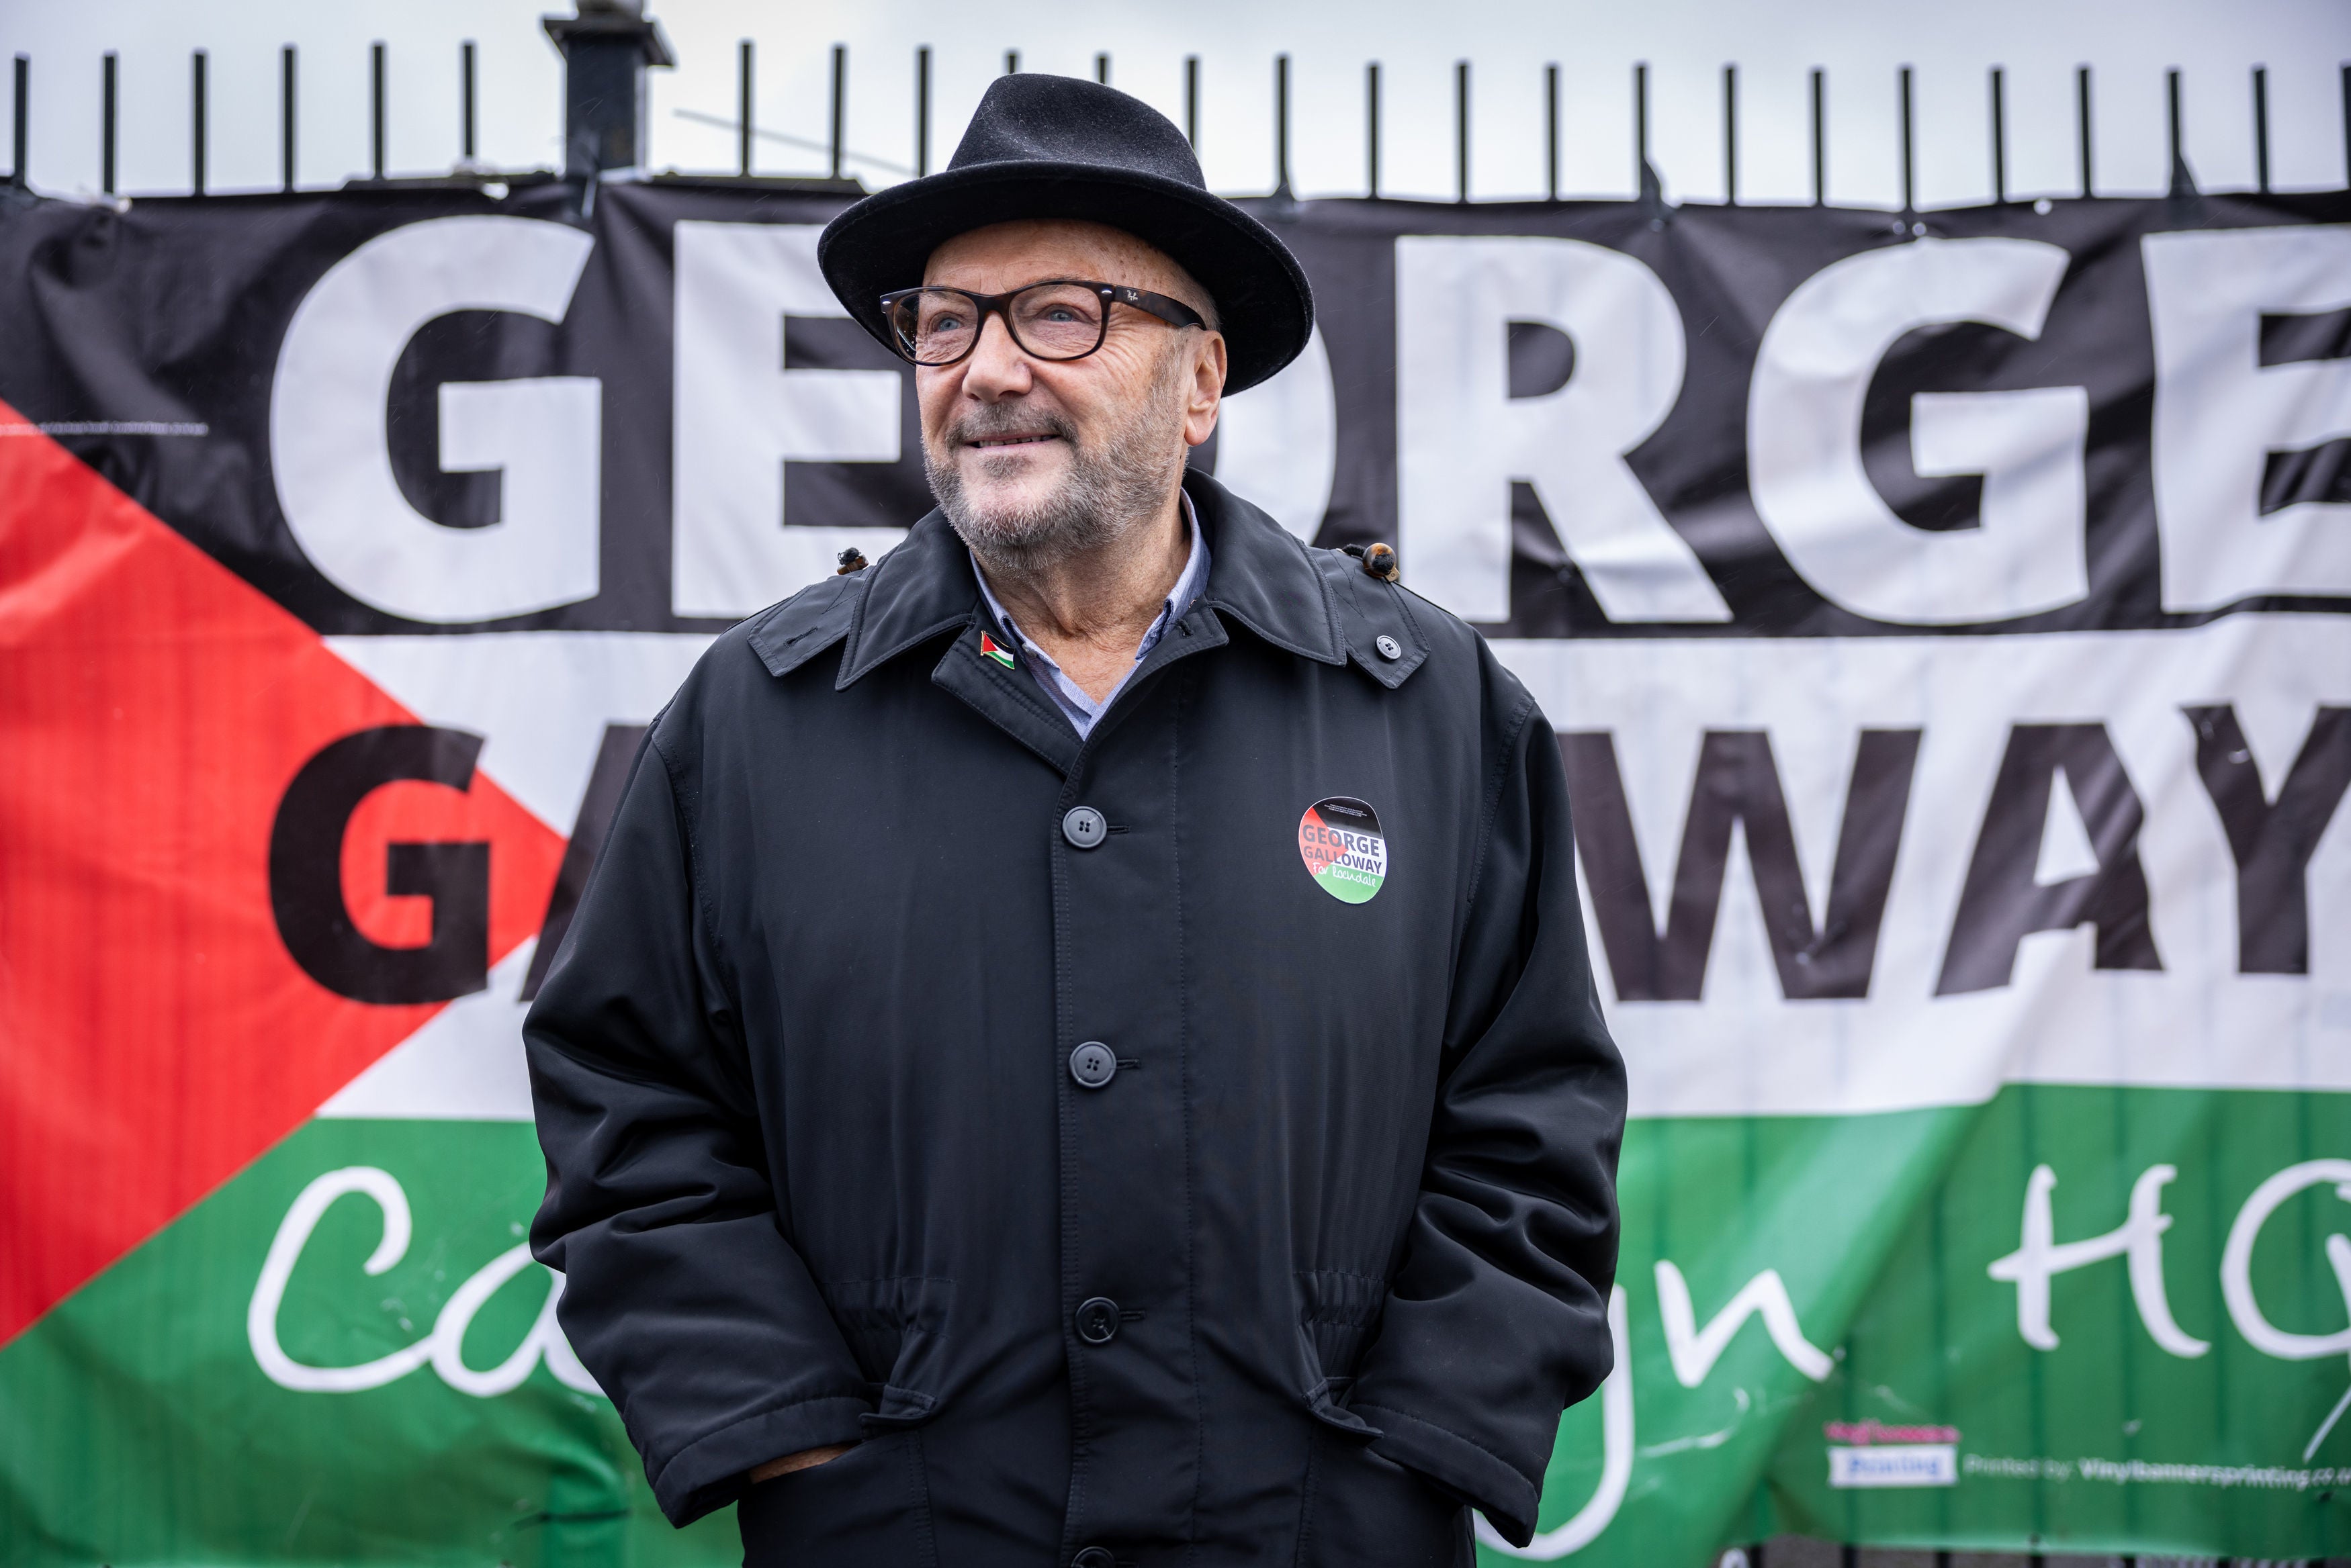 The ‘poisonous’ George Galloway is looking like one of the more likely to walk away as victor